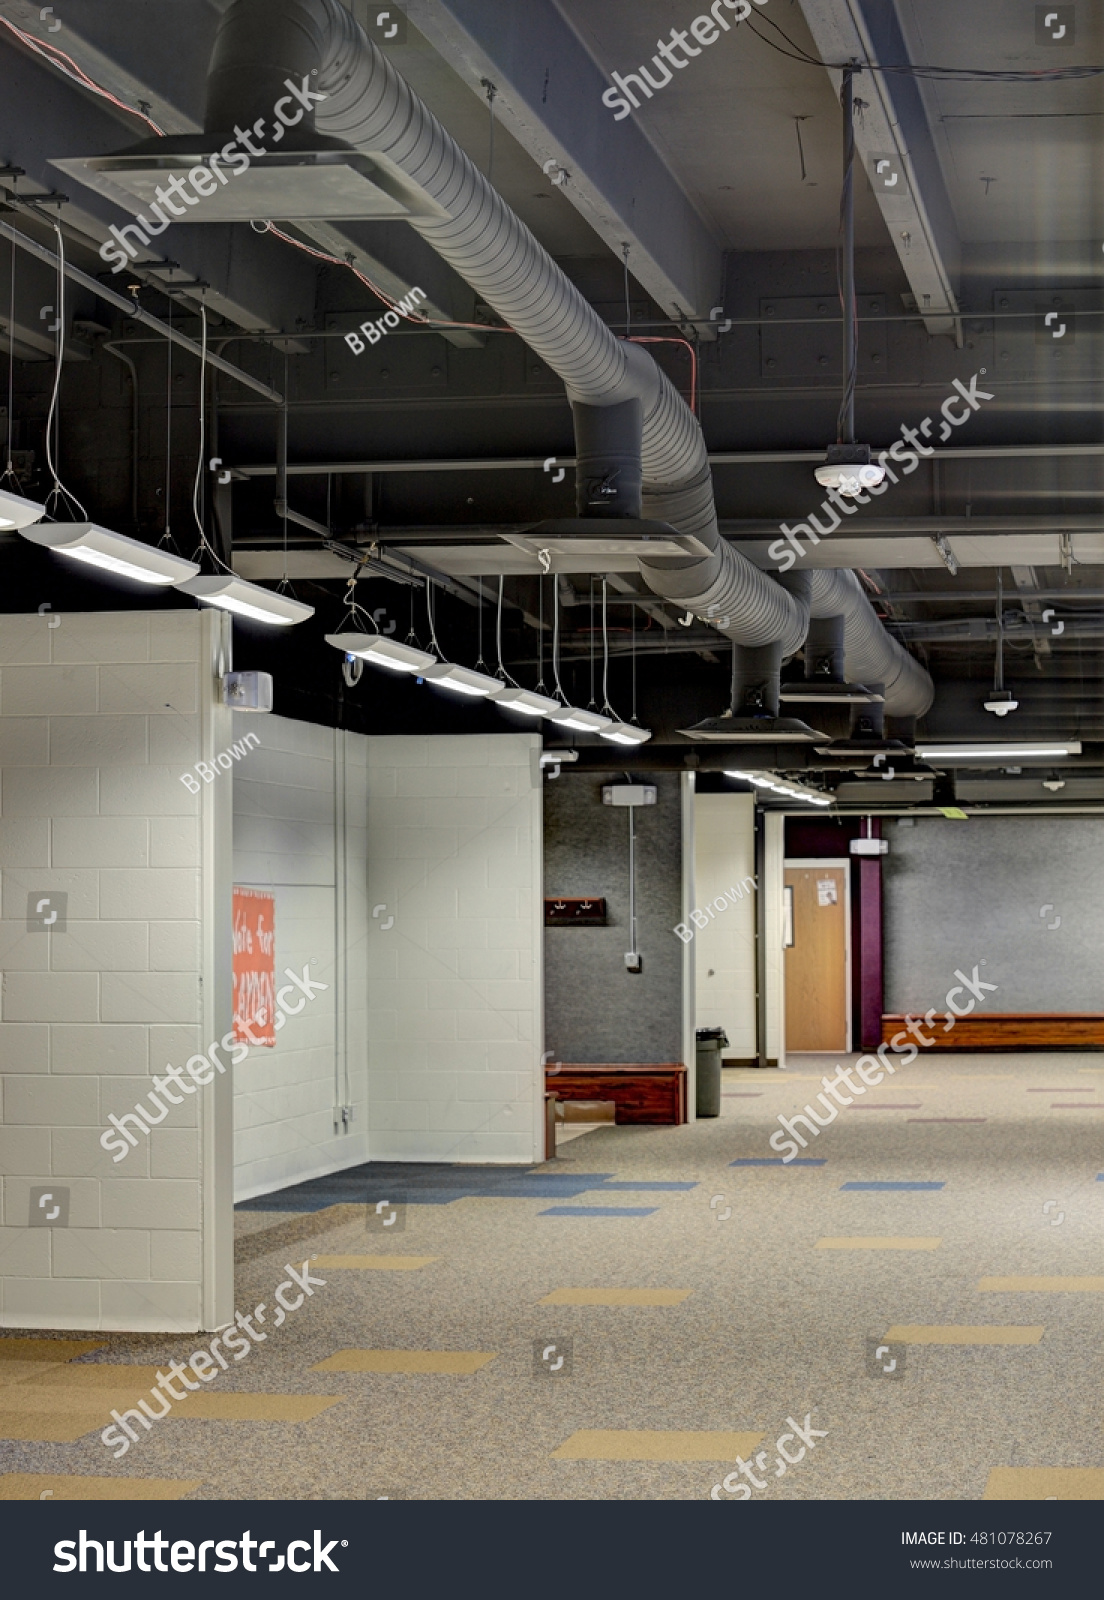 Exposed Ceiling Duct Work Modern High Royalty Free Stock Image